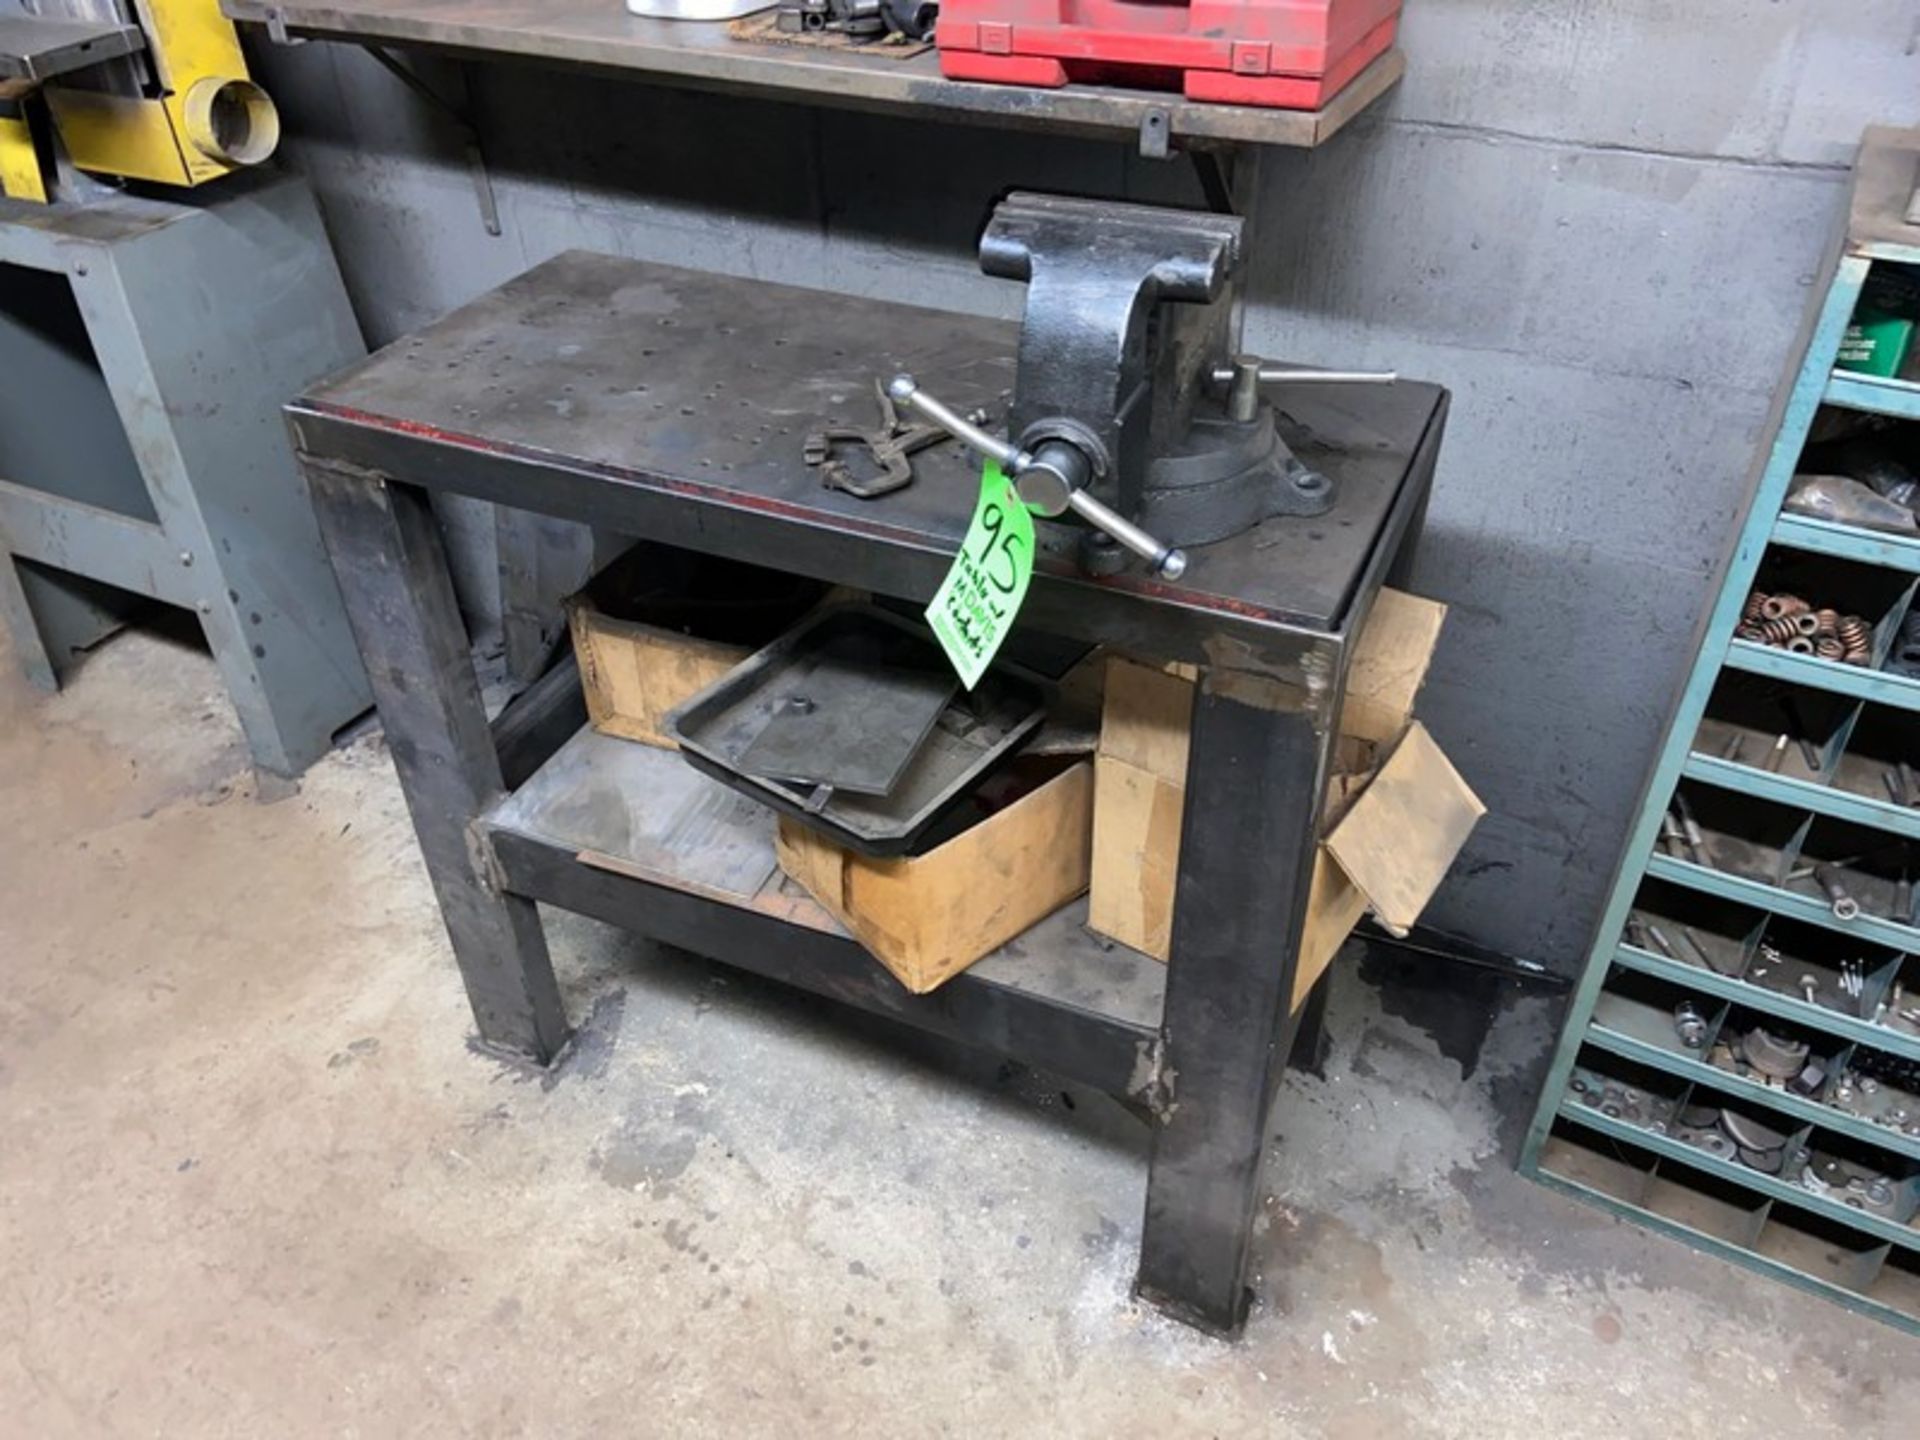 Shop Table with Vise (LOCATED IN CORRY, PA) - Image 2 of 3